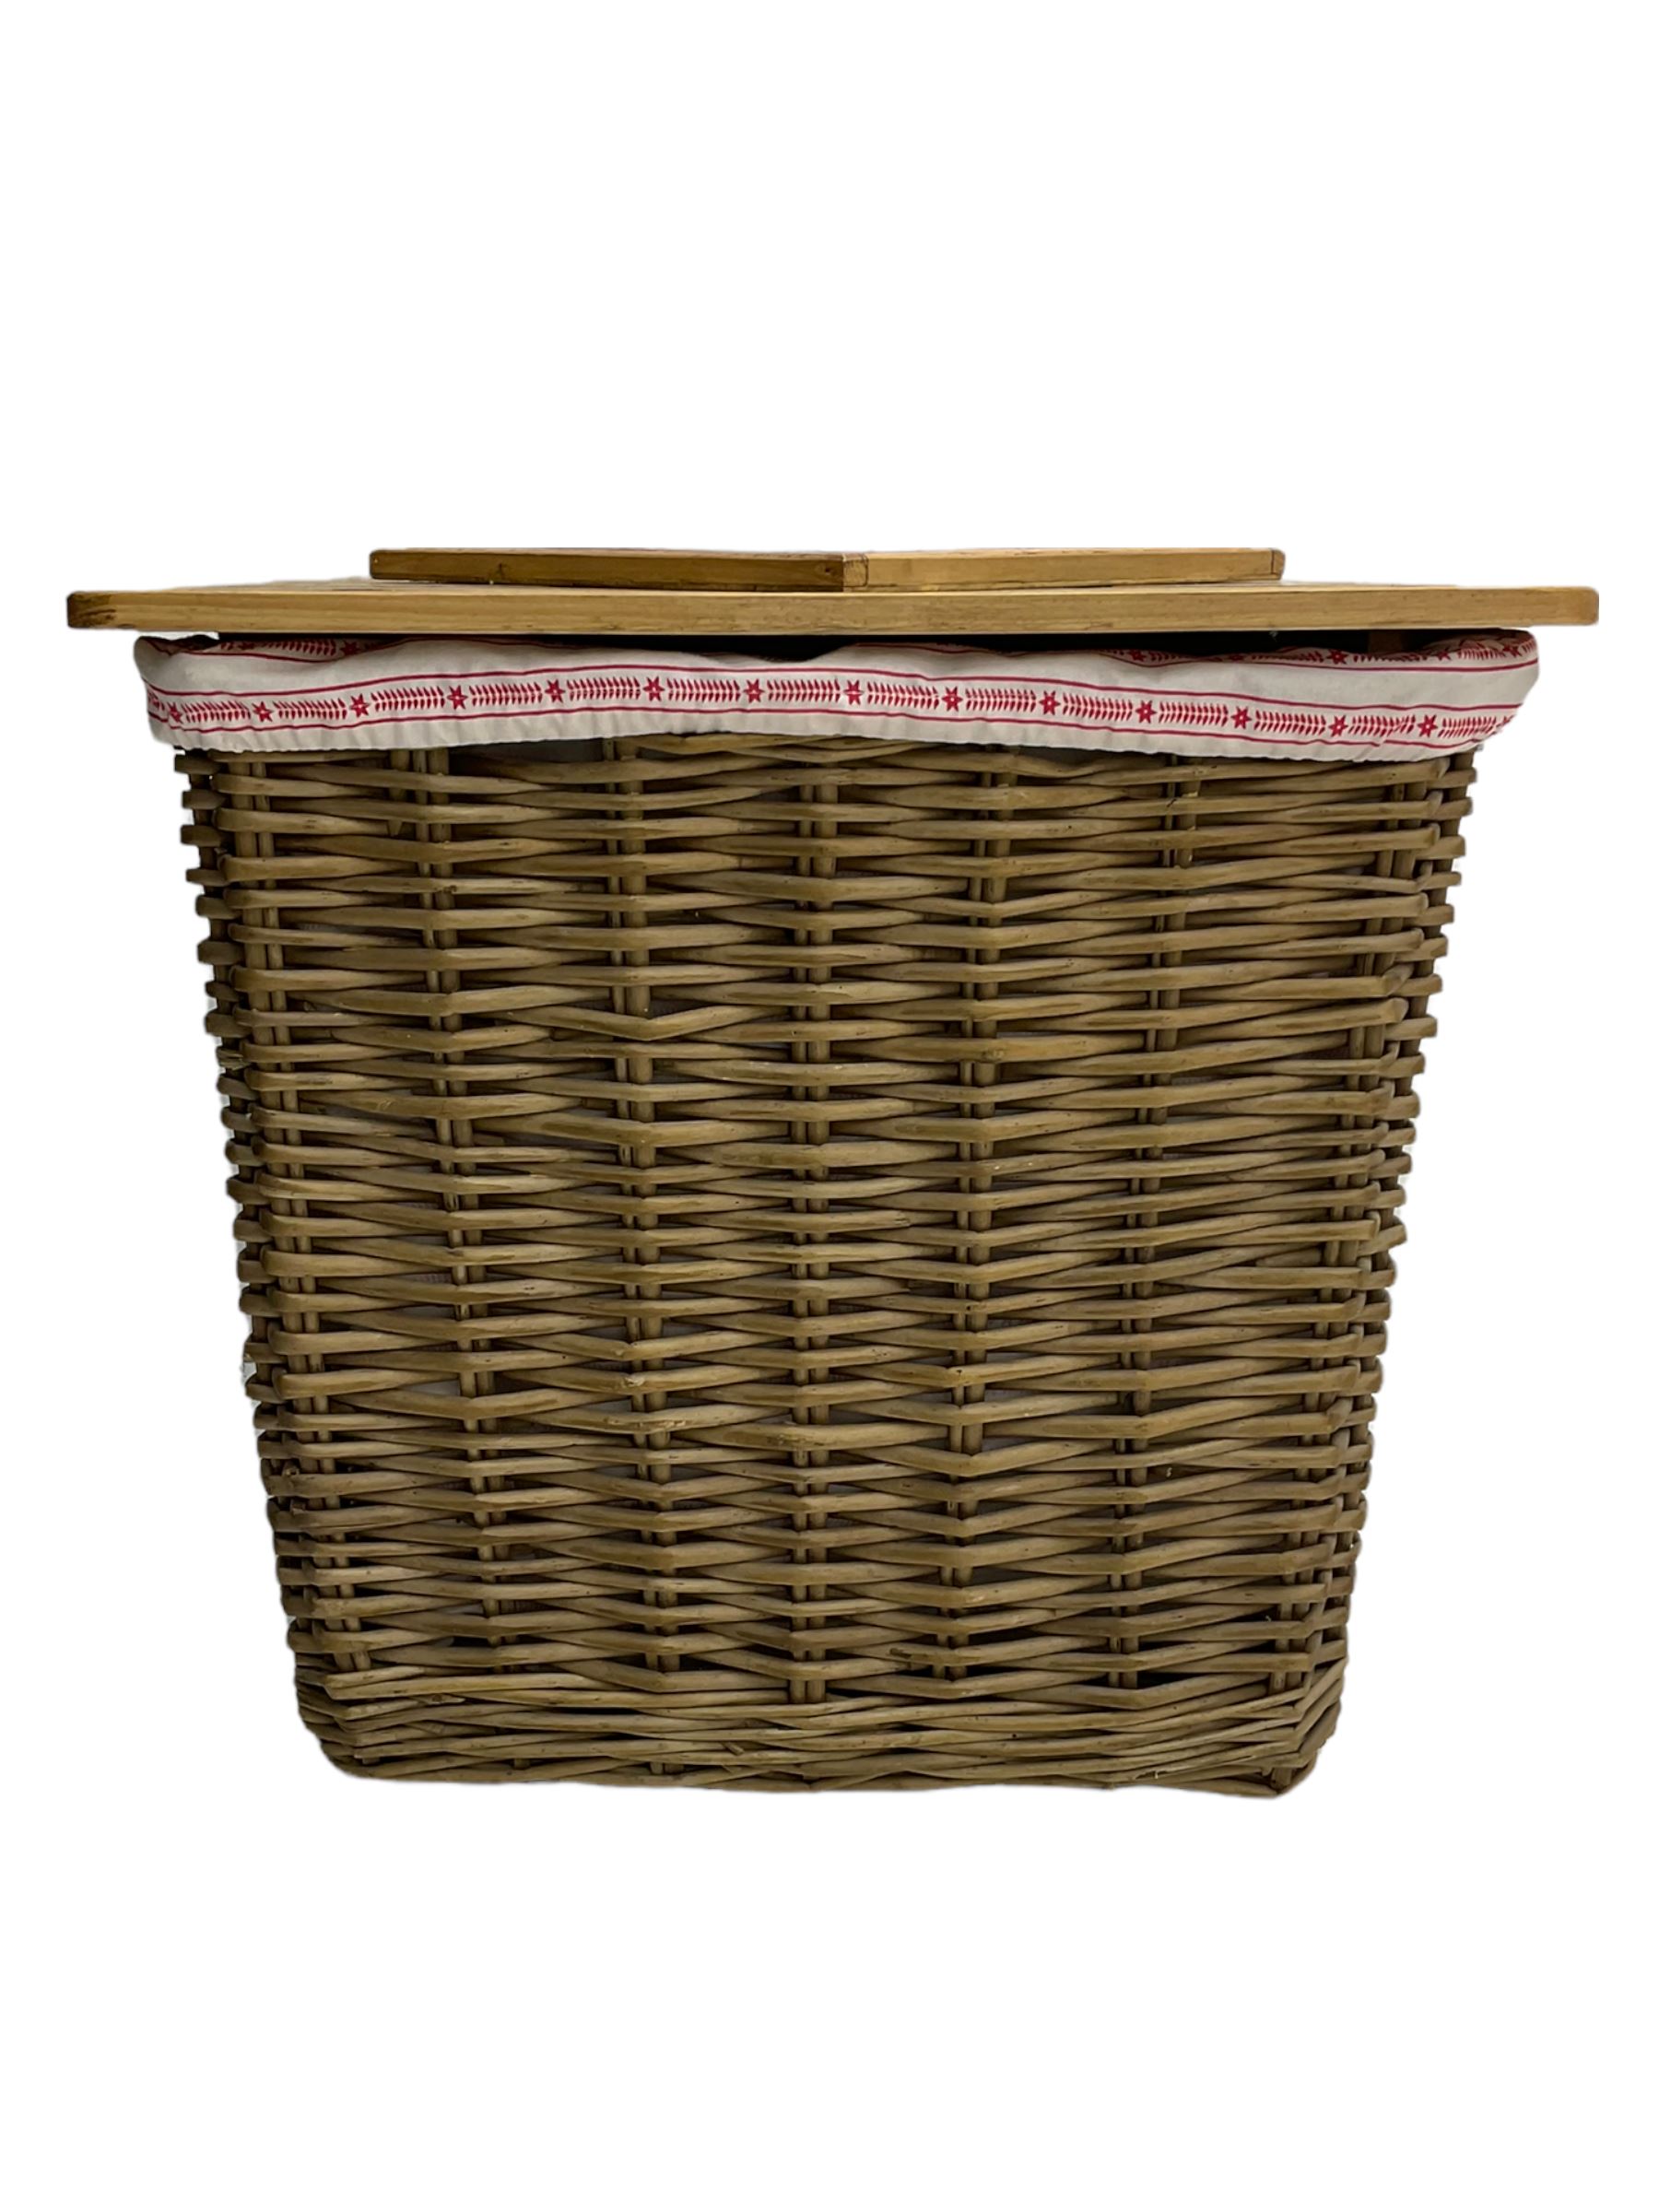 Wicker linen basket with plank Union Jack top - Image 3 of 5